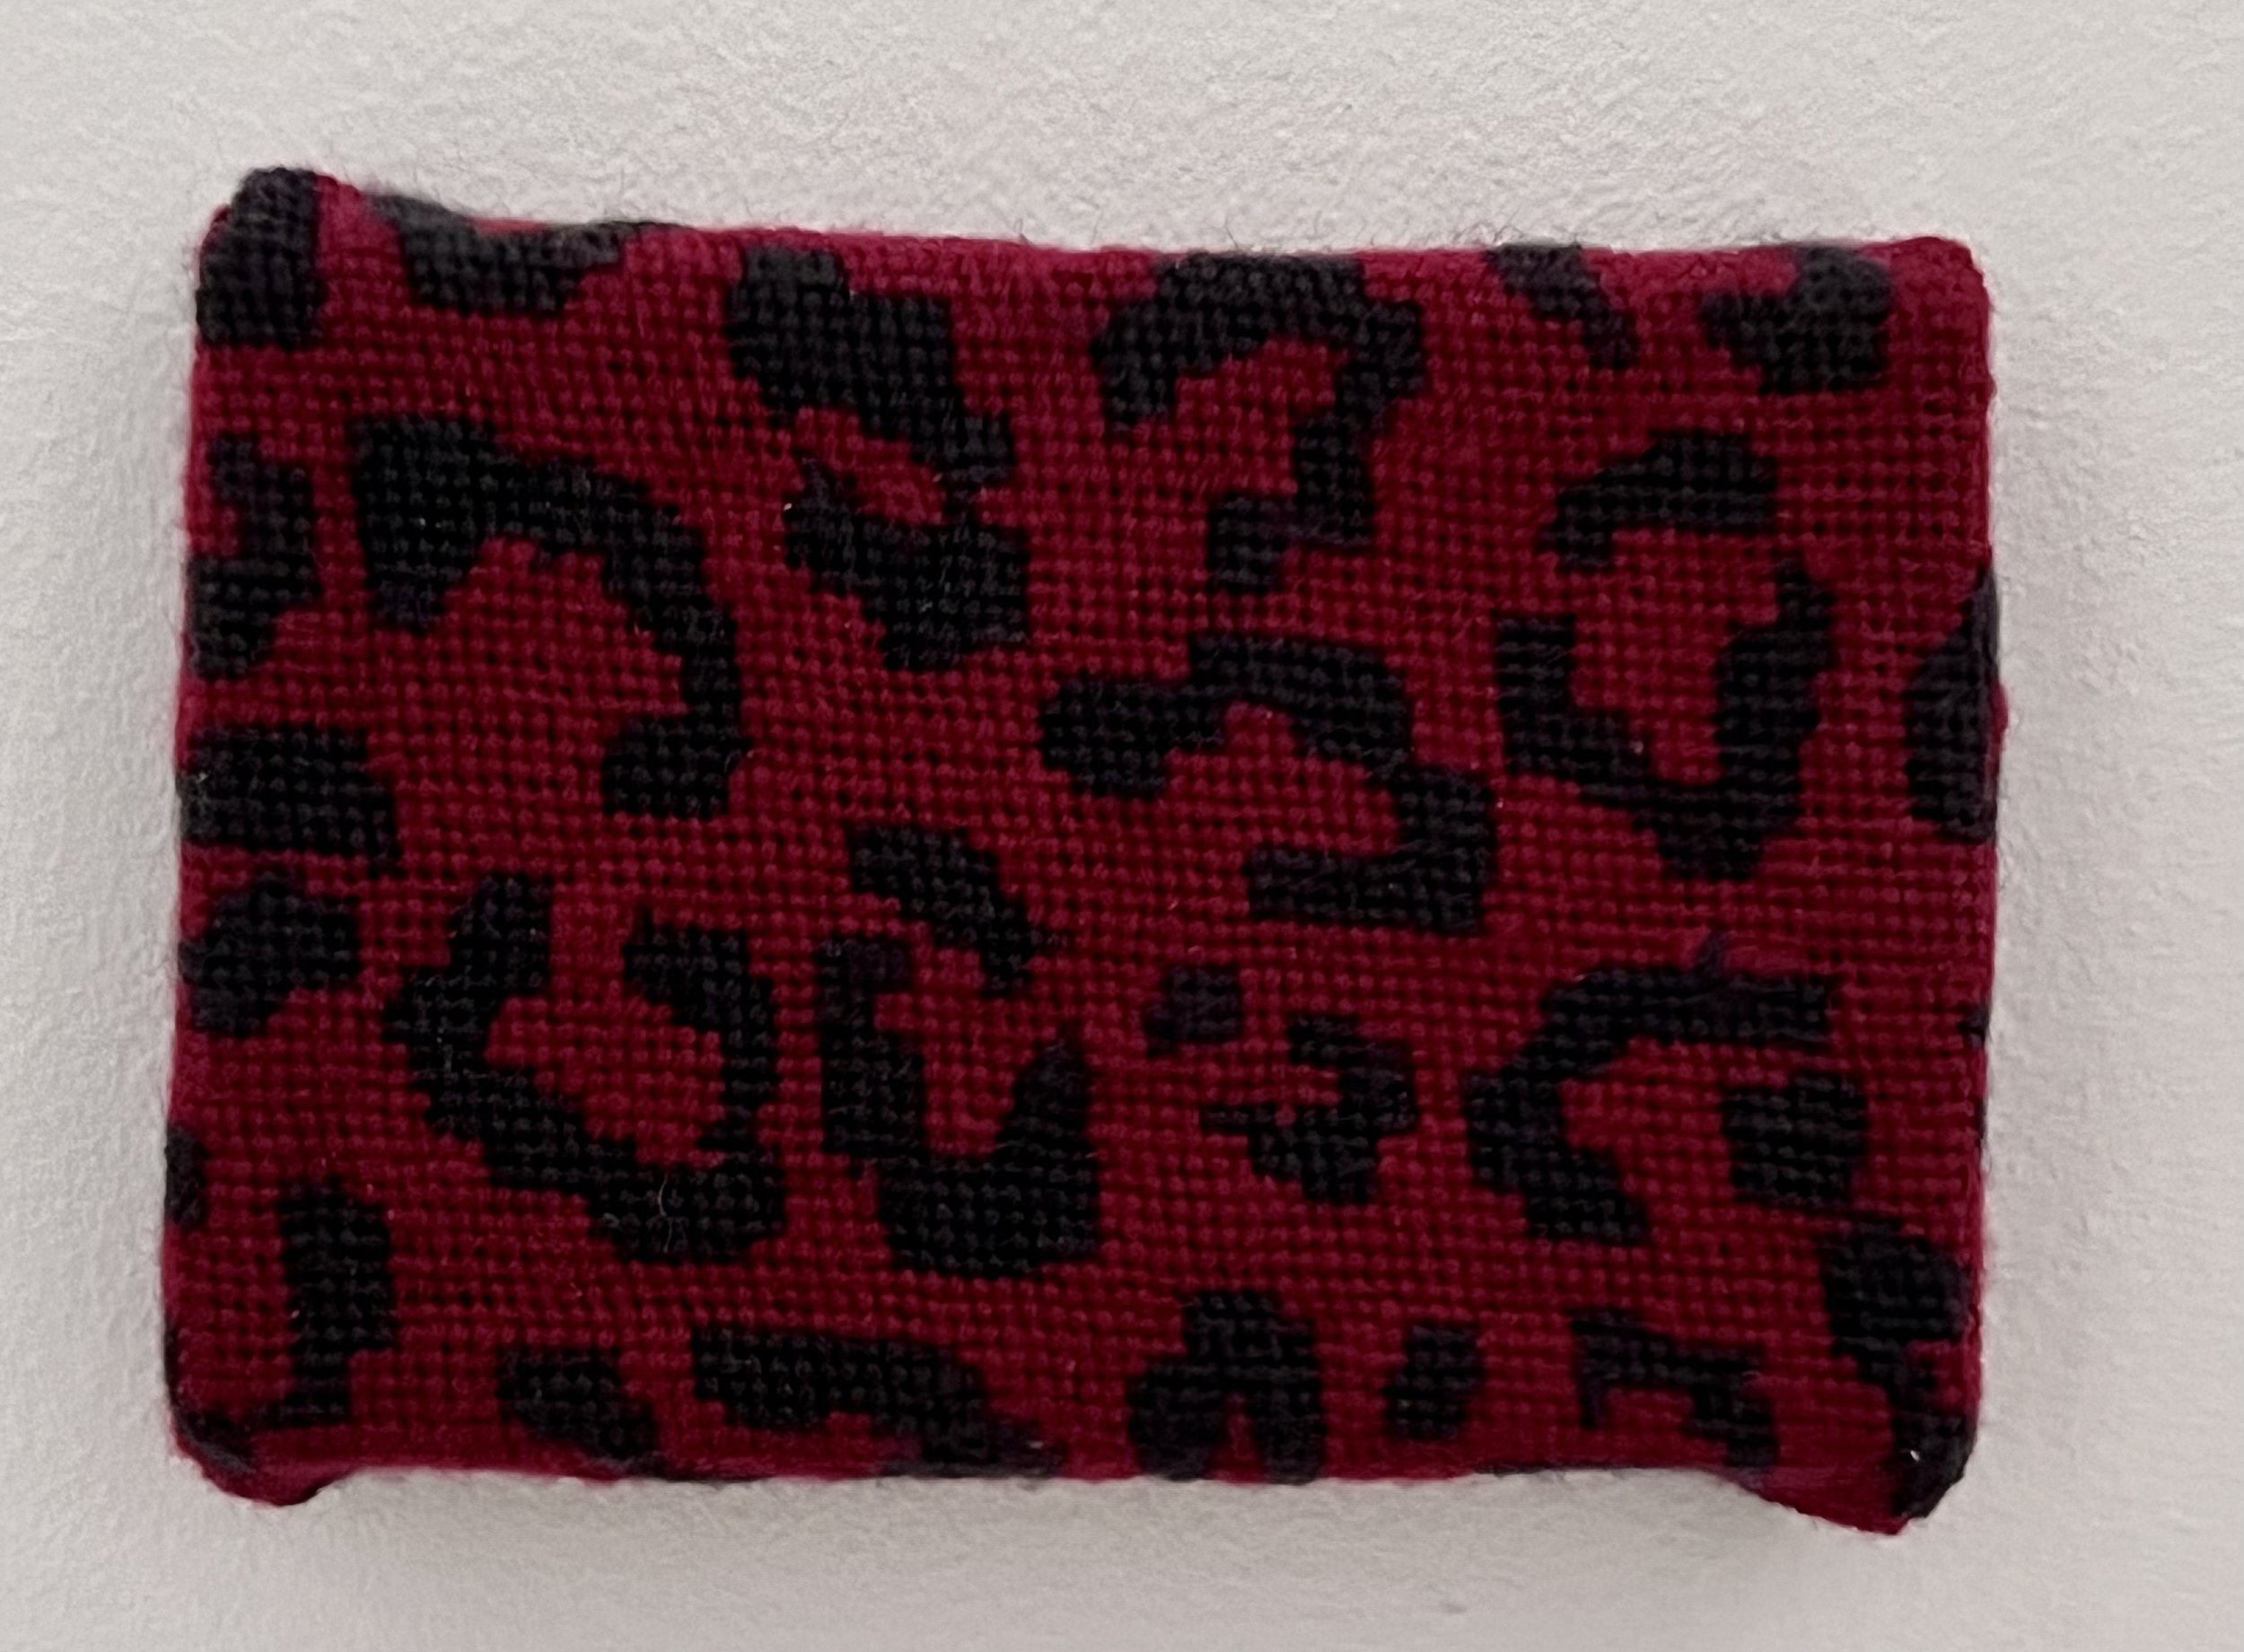   Magnus Peterson Horner    Red Cheetah,  2022  Needlepoint  4 x 6 inches 